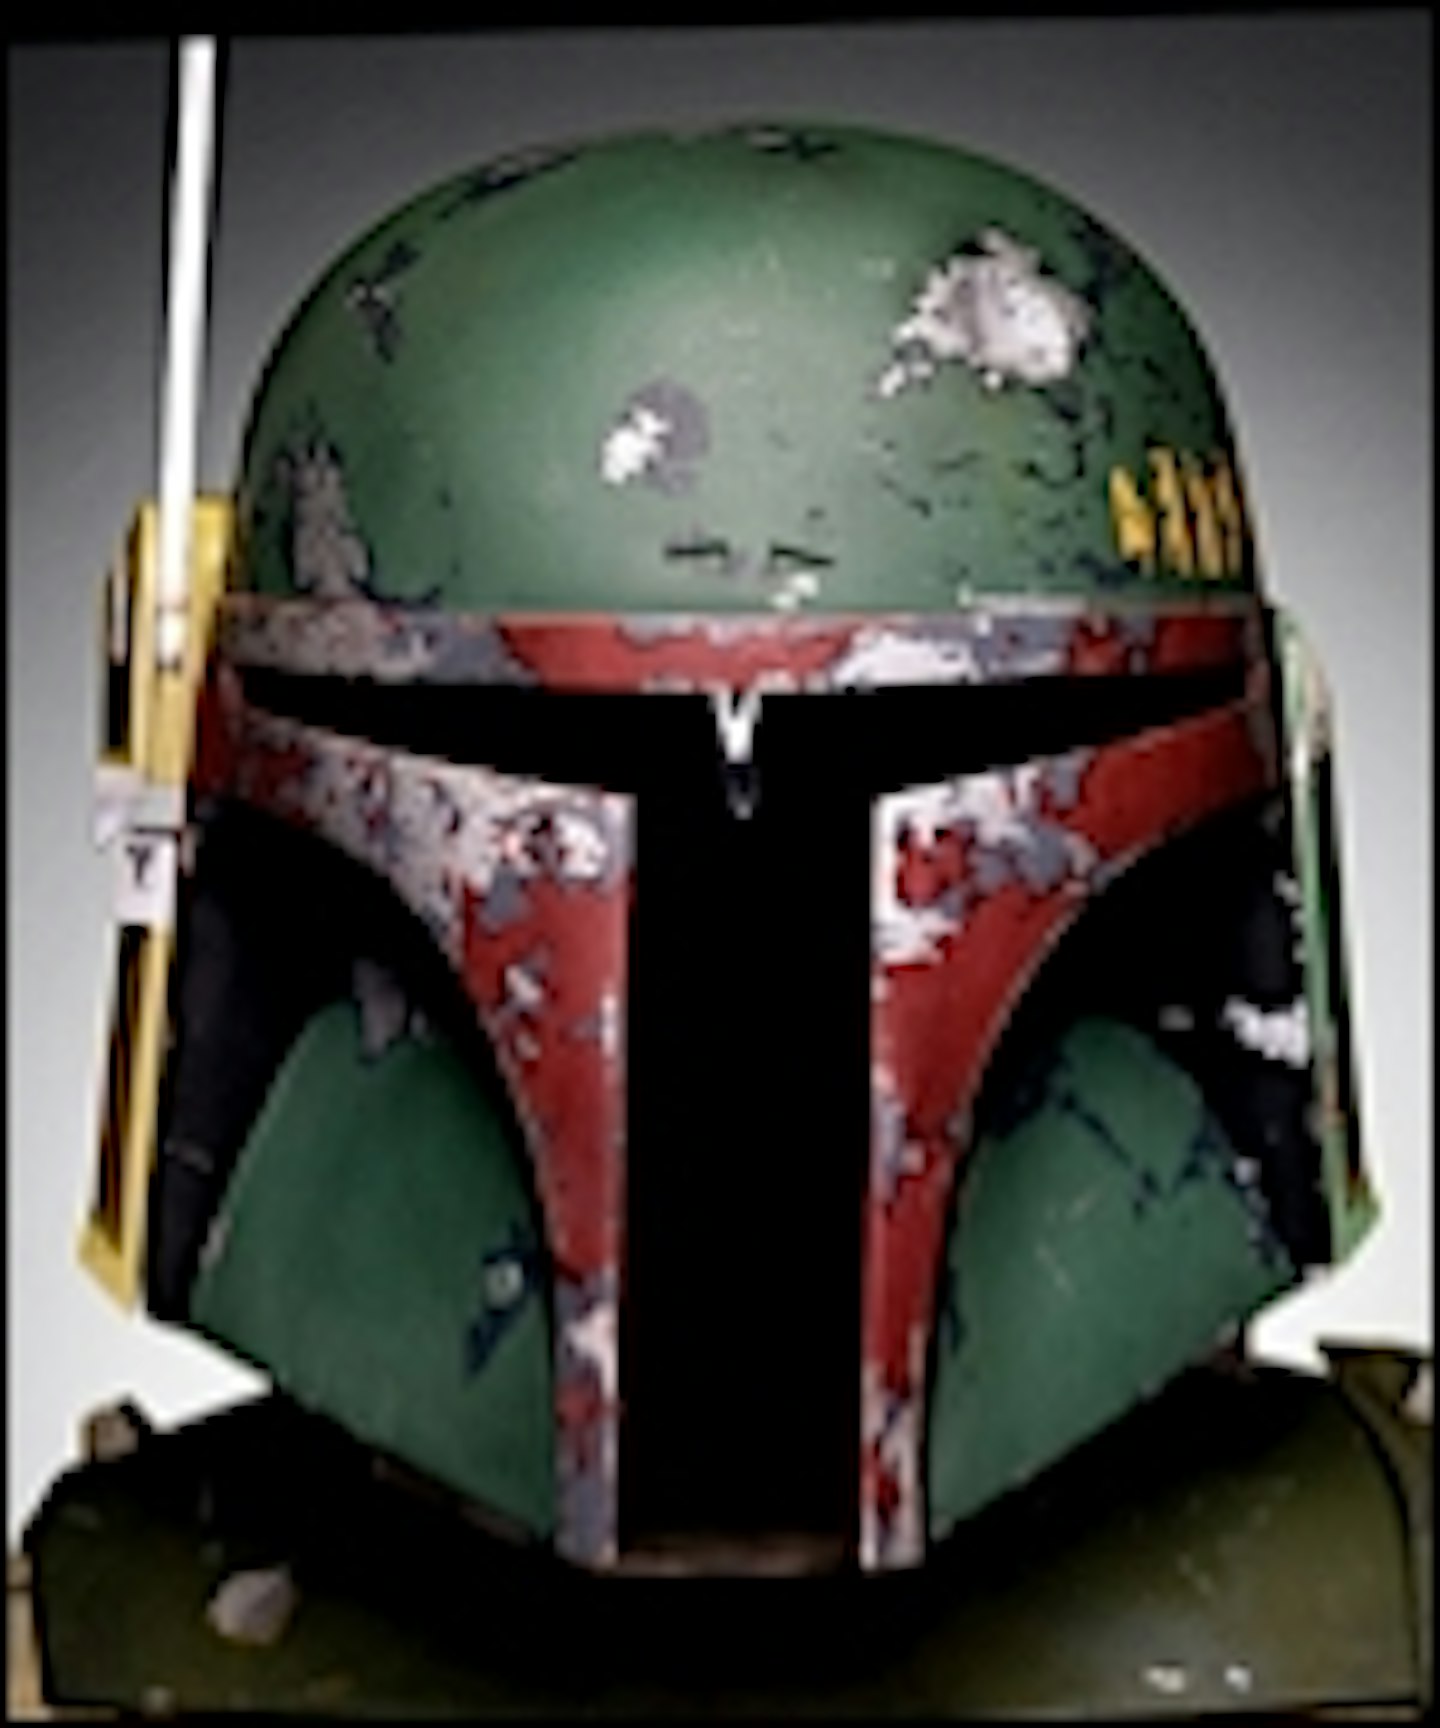 Second Star Wars Anthology Film Reportedly About Boba Fett